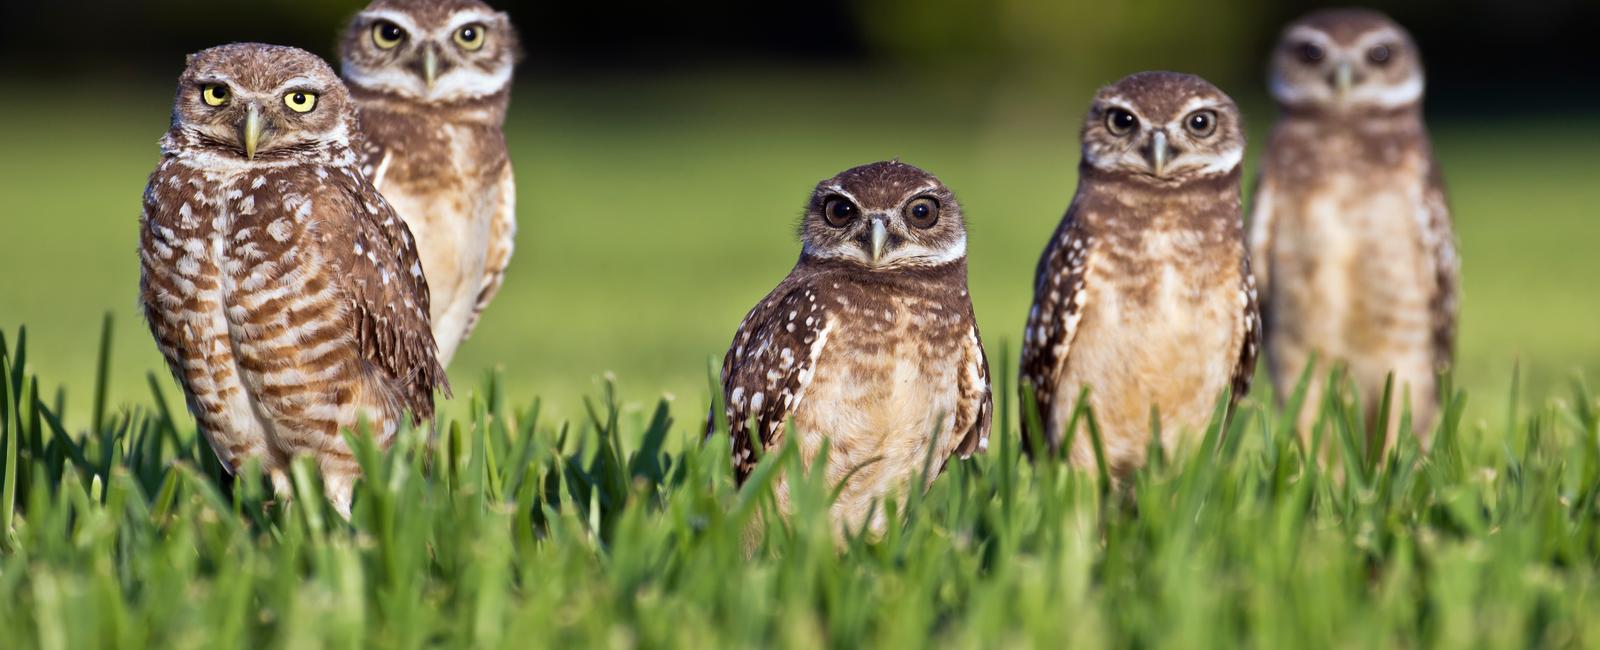 A group of owls is called a parliament